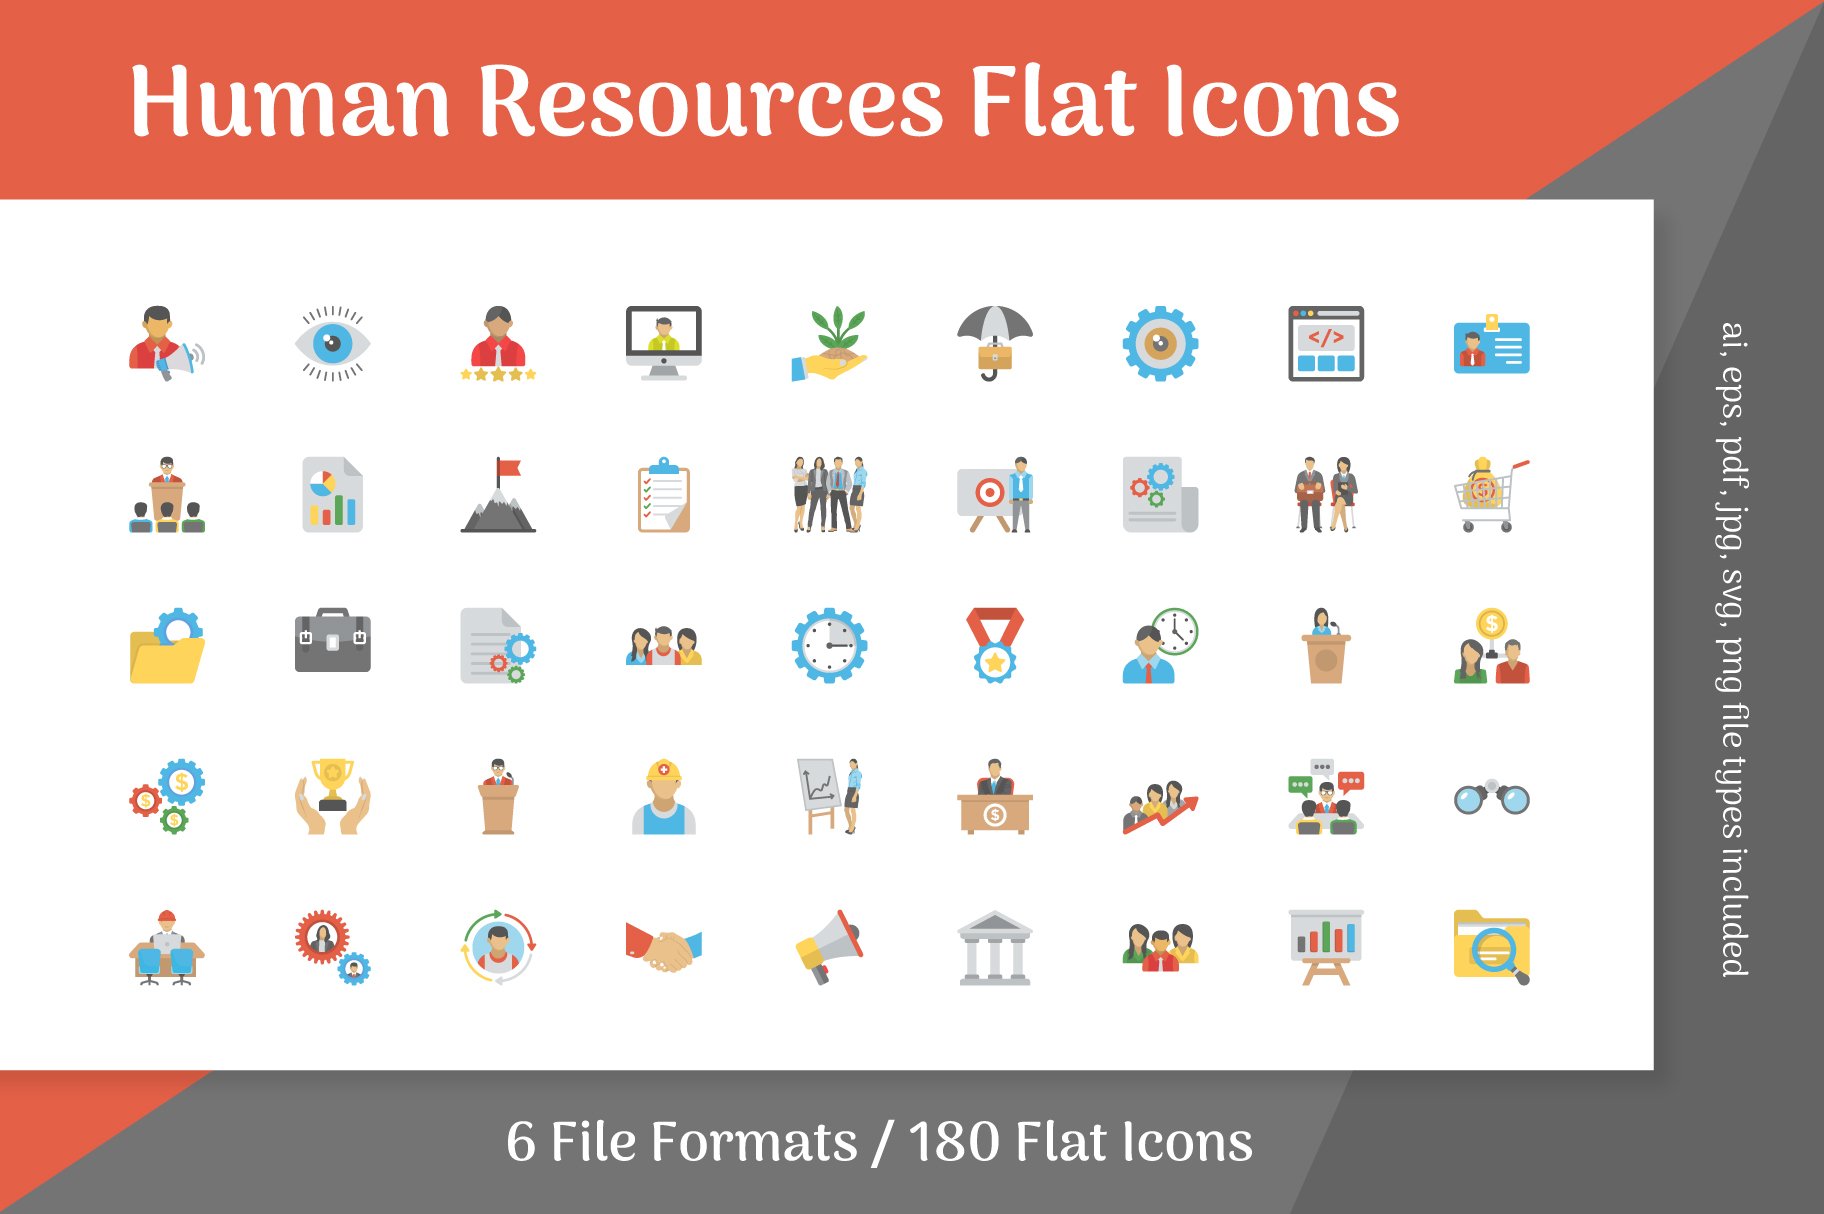 180 Human Resources Flat Icons cover image.